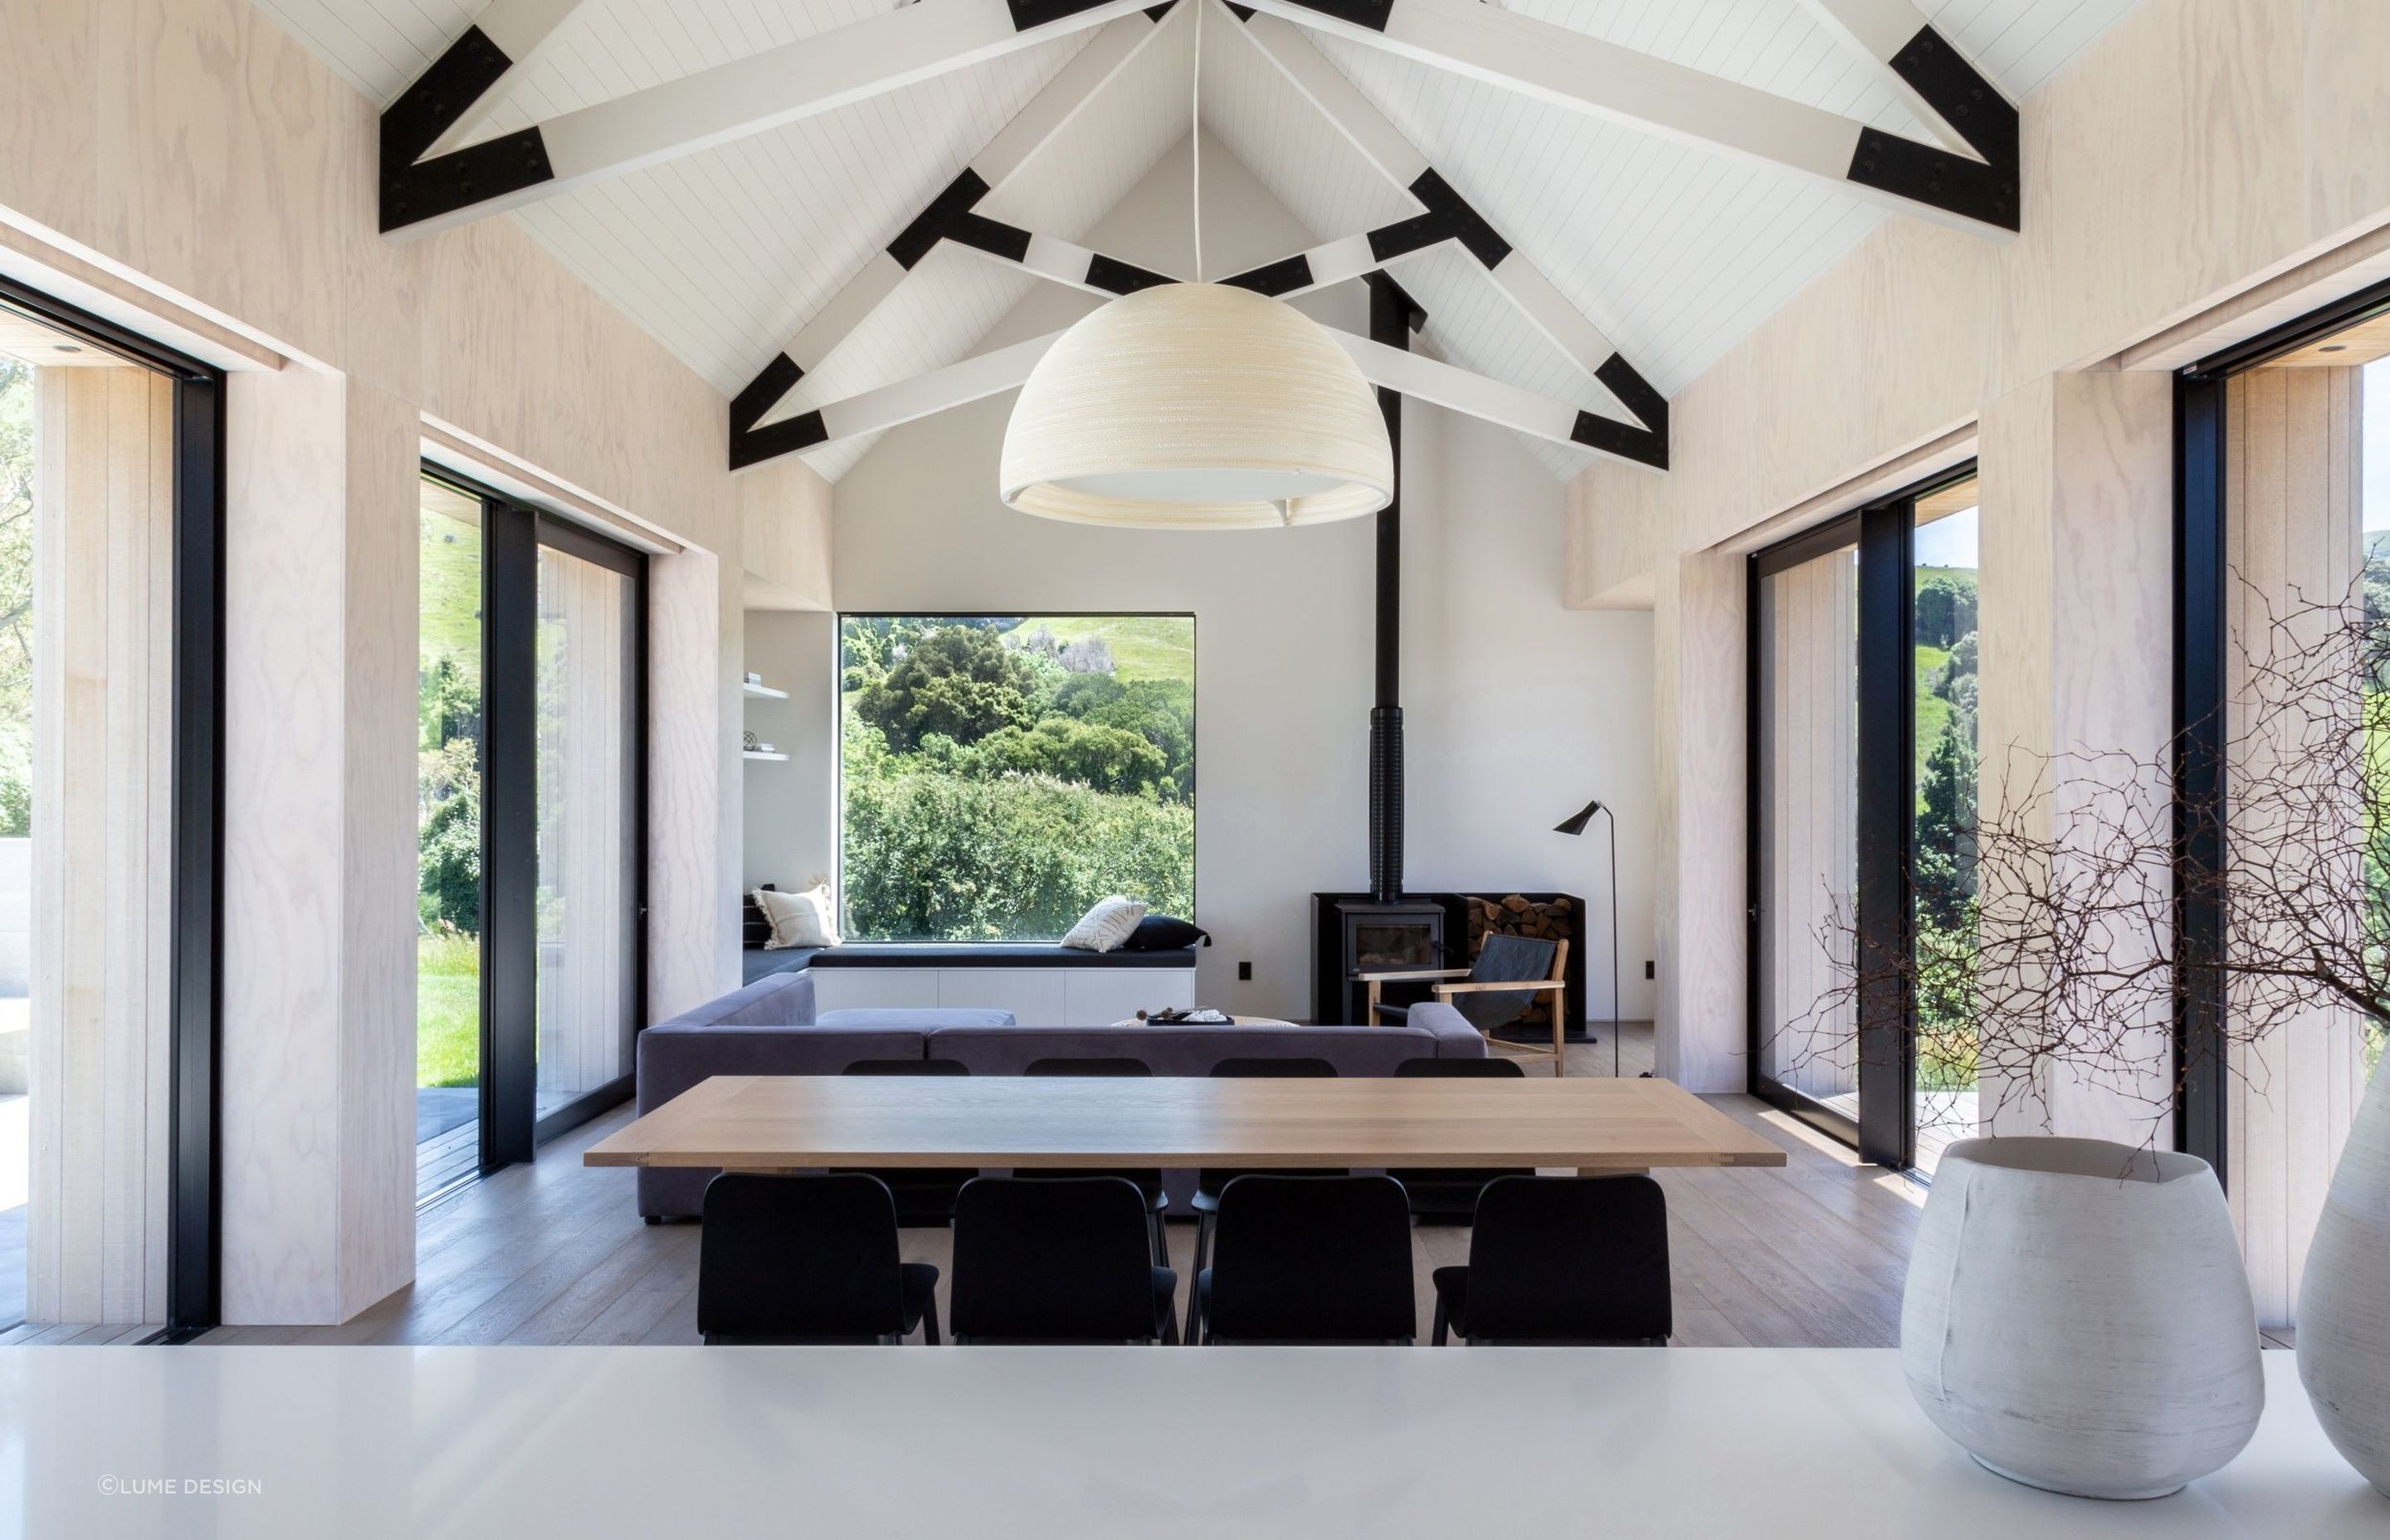 Minimalist sophistication and style in this Banks Peninsula holiday home.